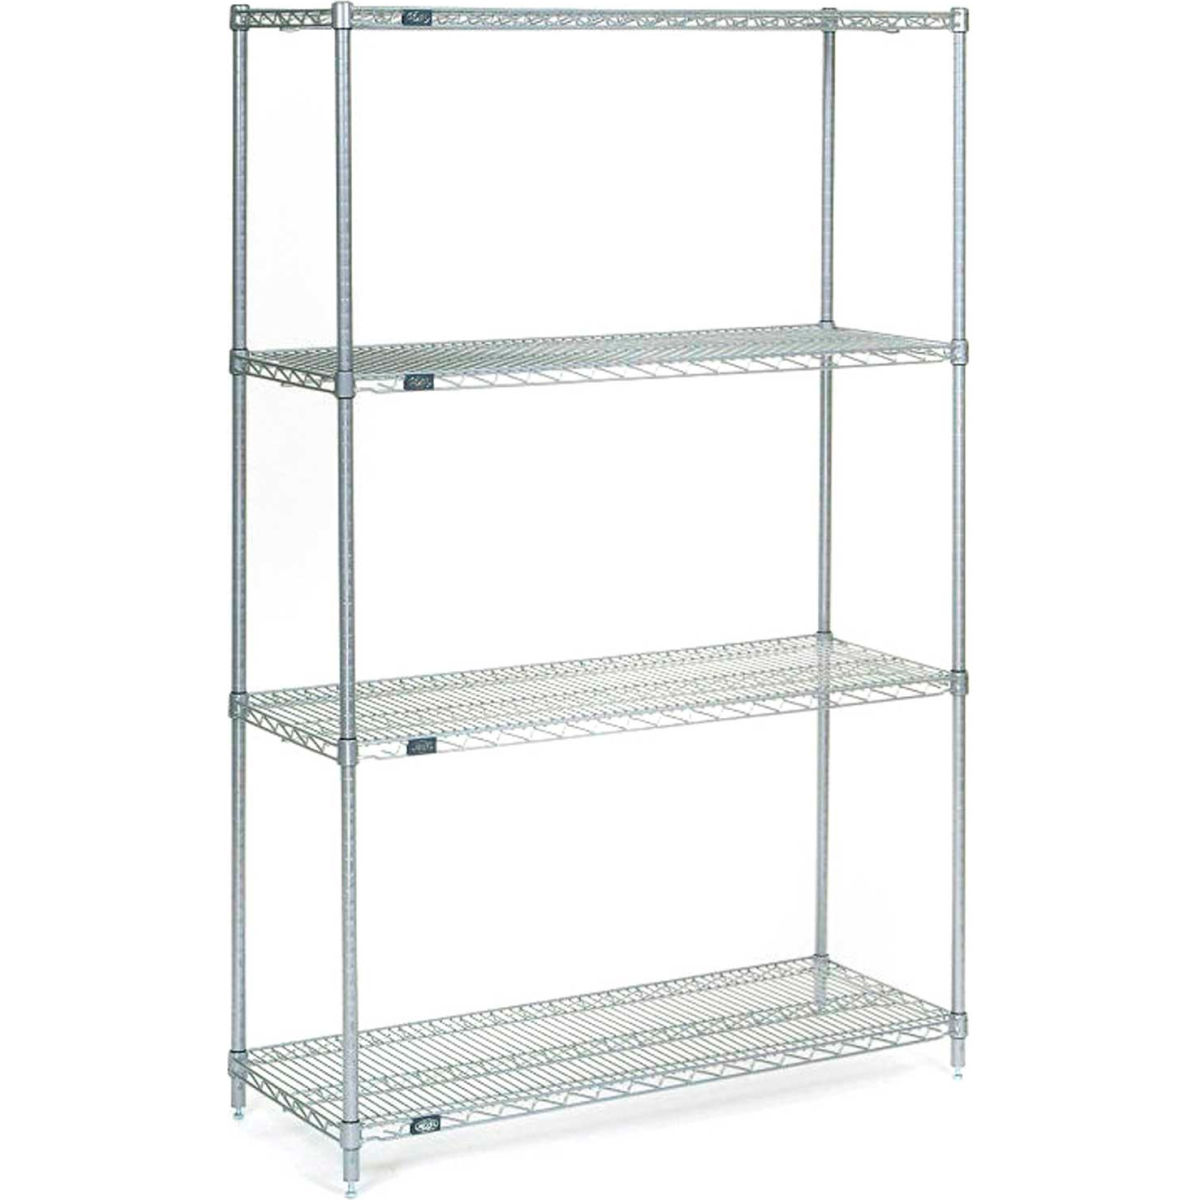 Picture of Global Industrial 14246S 63 x 24 x 14 in. Nexel Stainless Steel Starter Wire Shelving